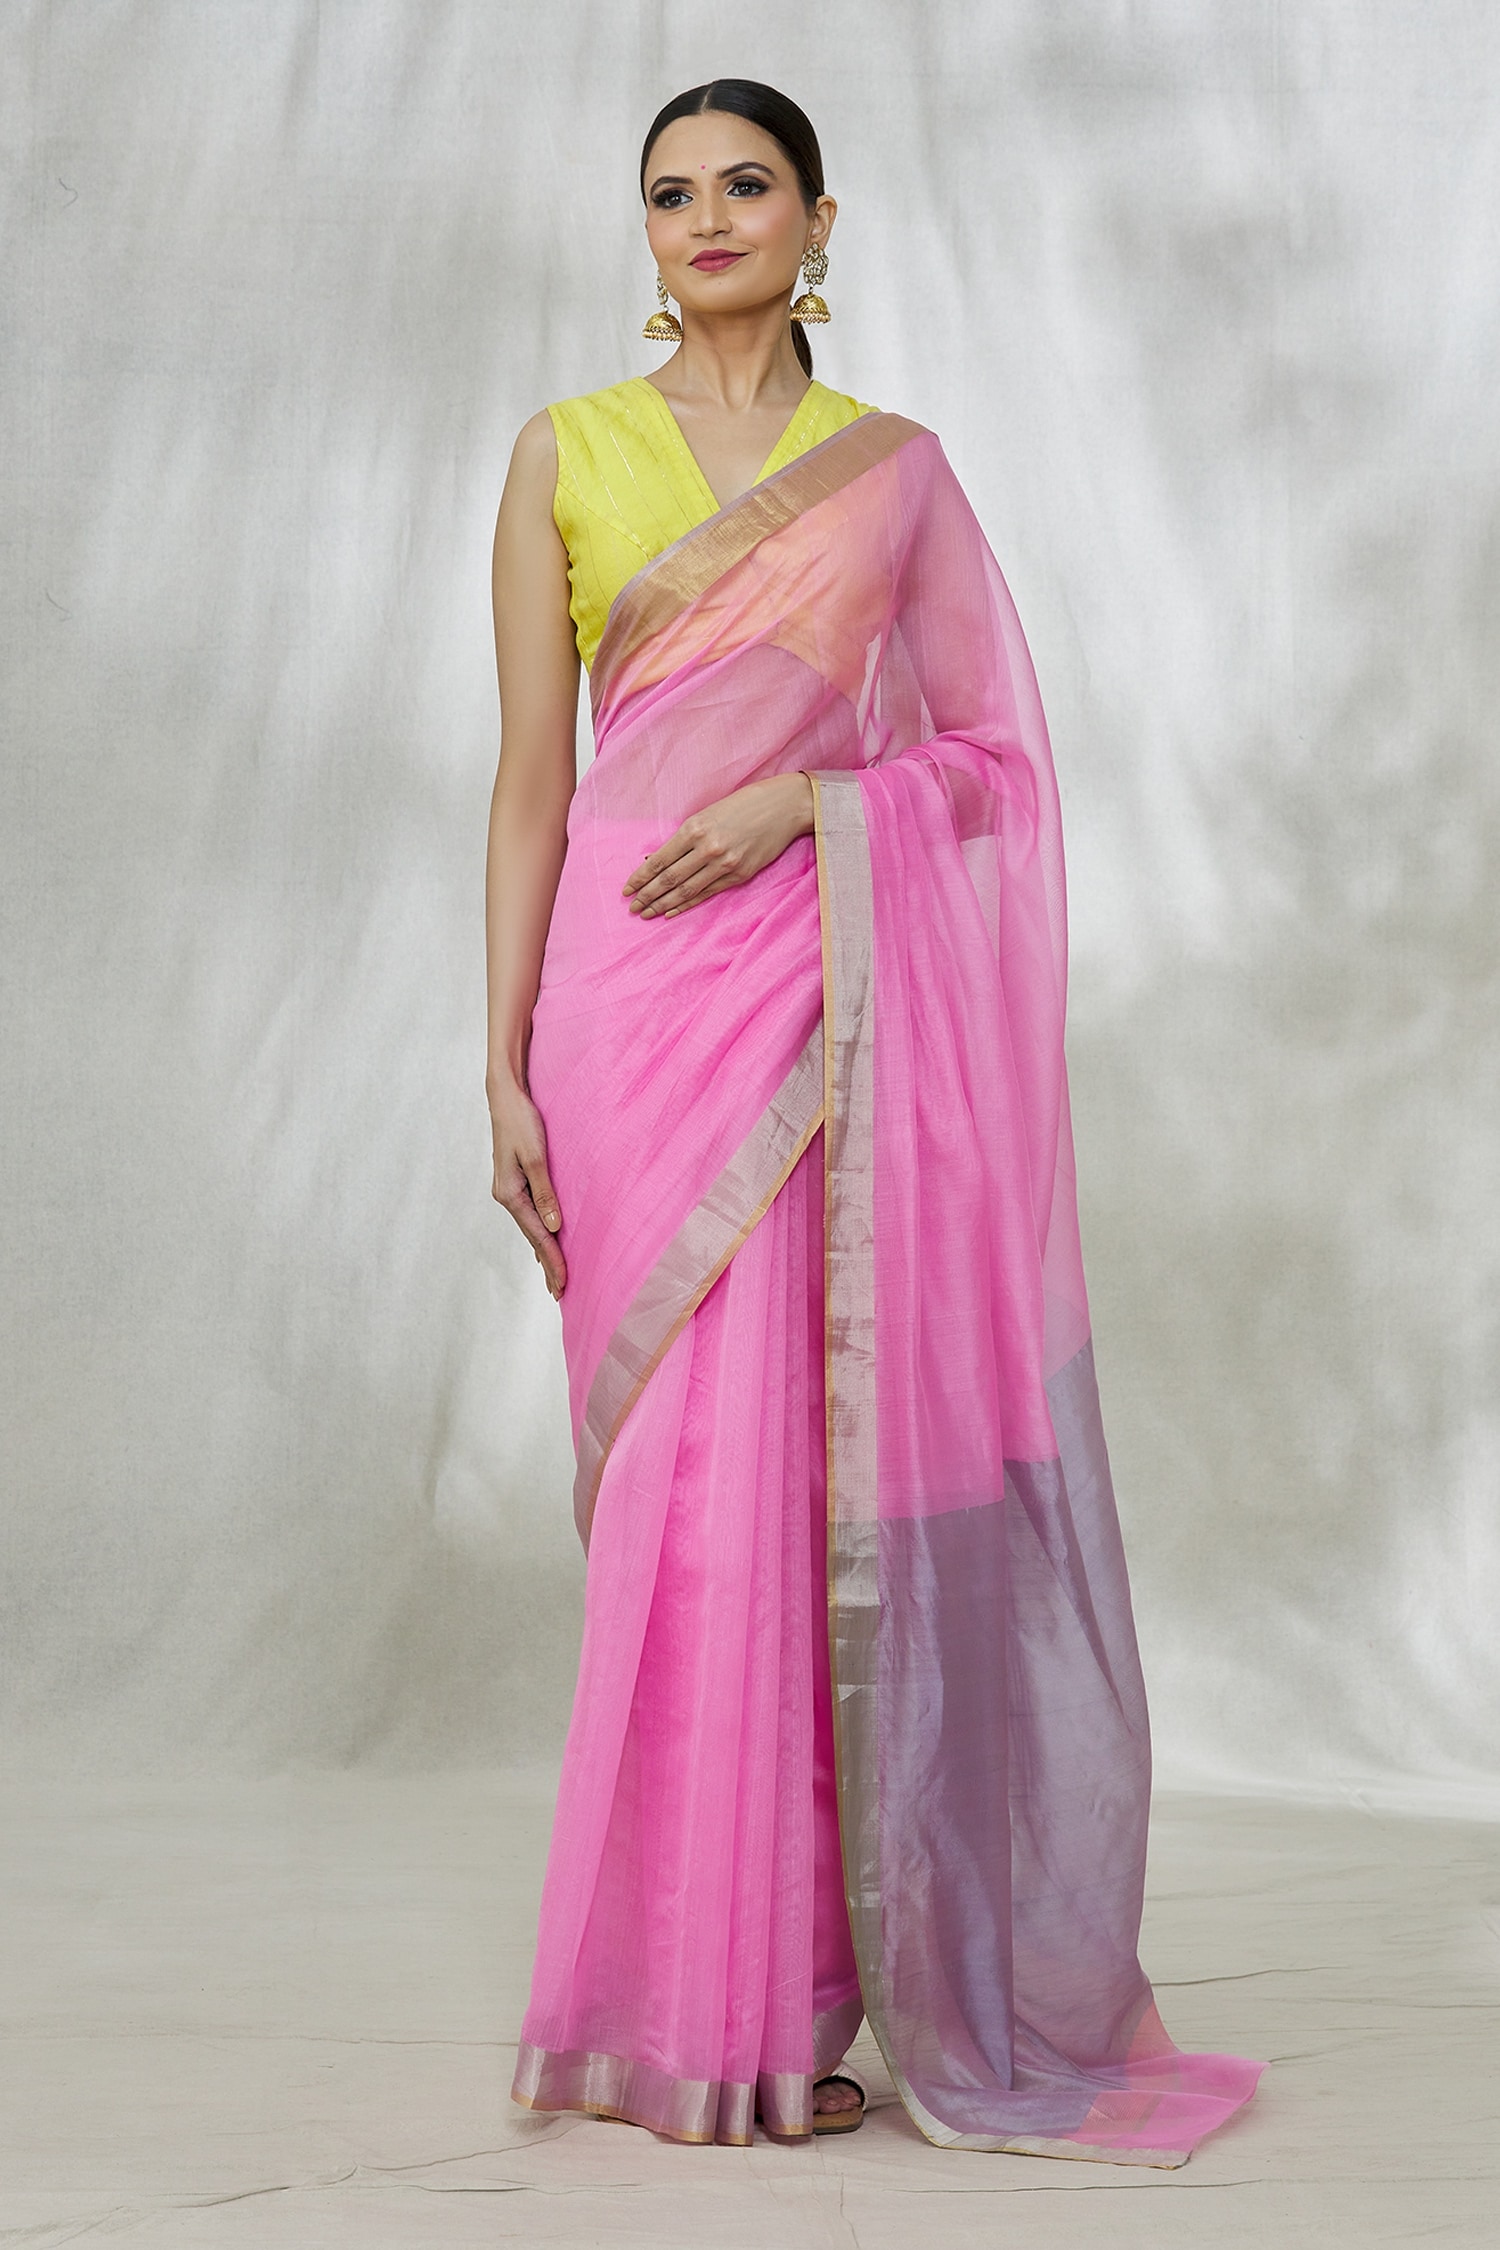 How to Wear Different Color Sarees With Contrast Blouses! | Contrast blouse,  Pink saree, Dark pink saree contrast blouse